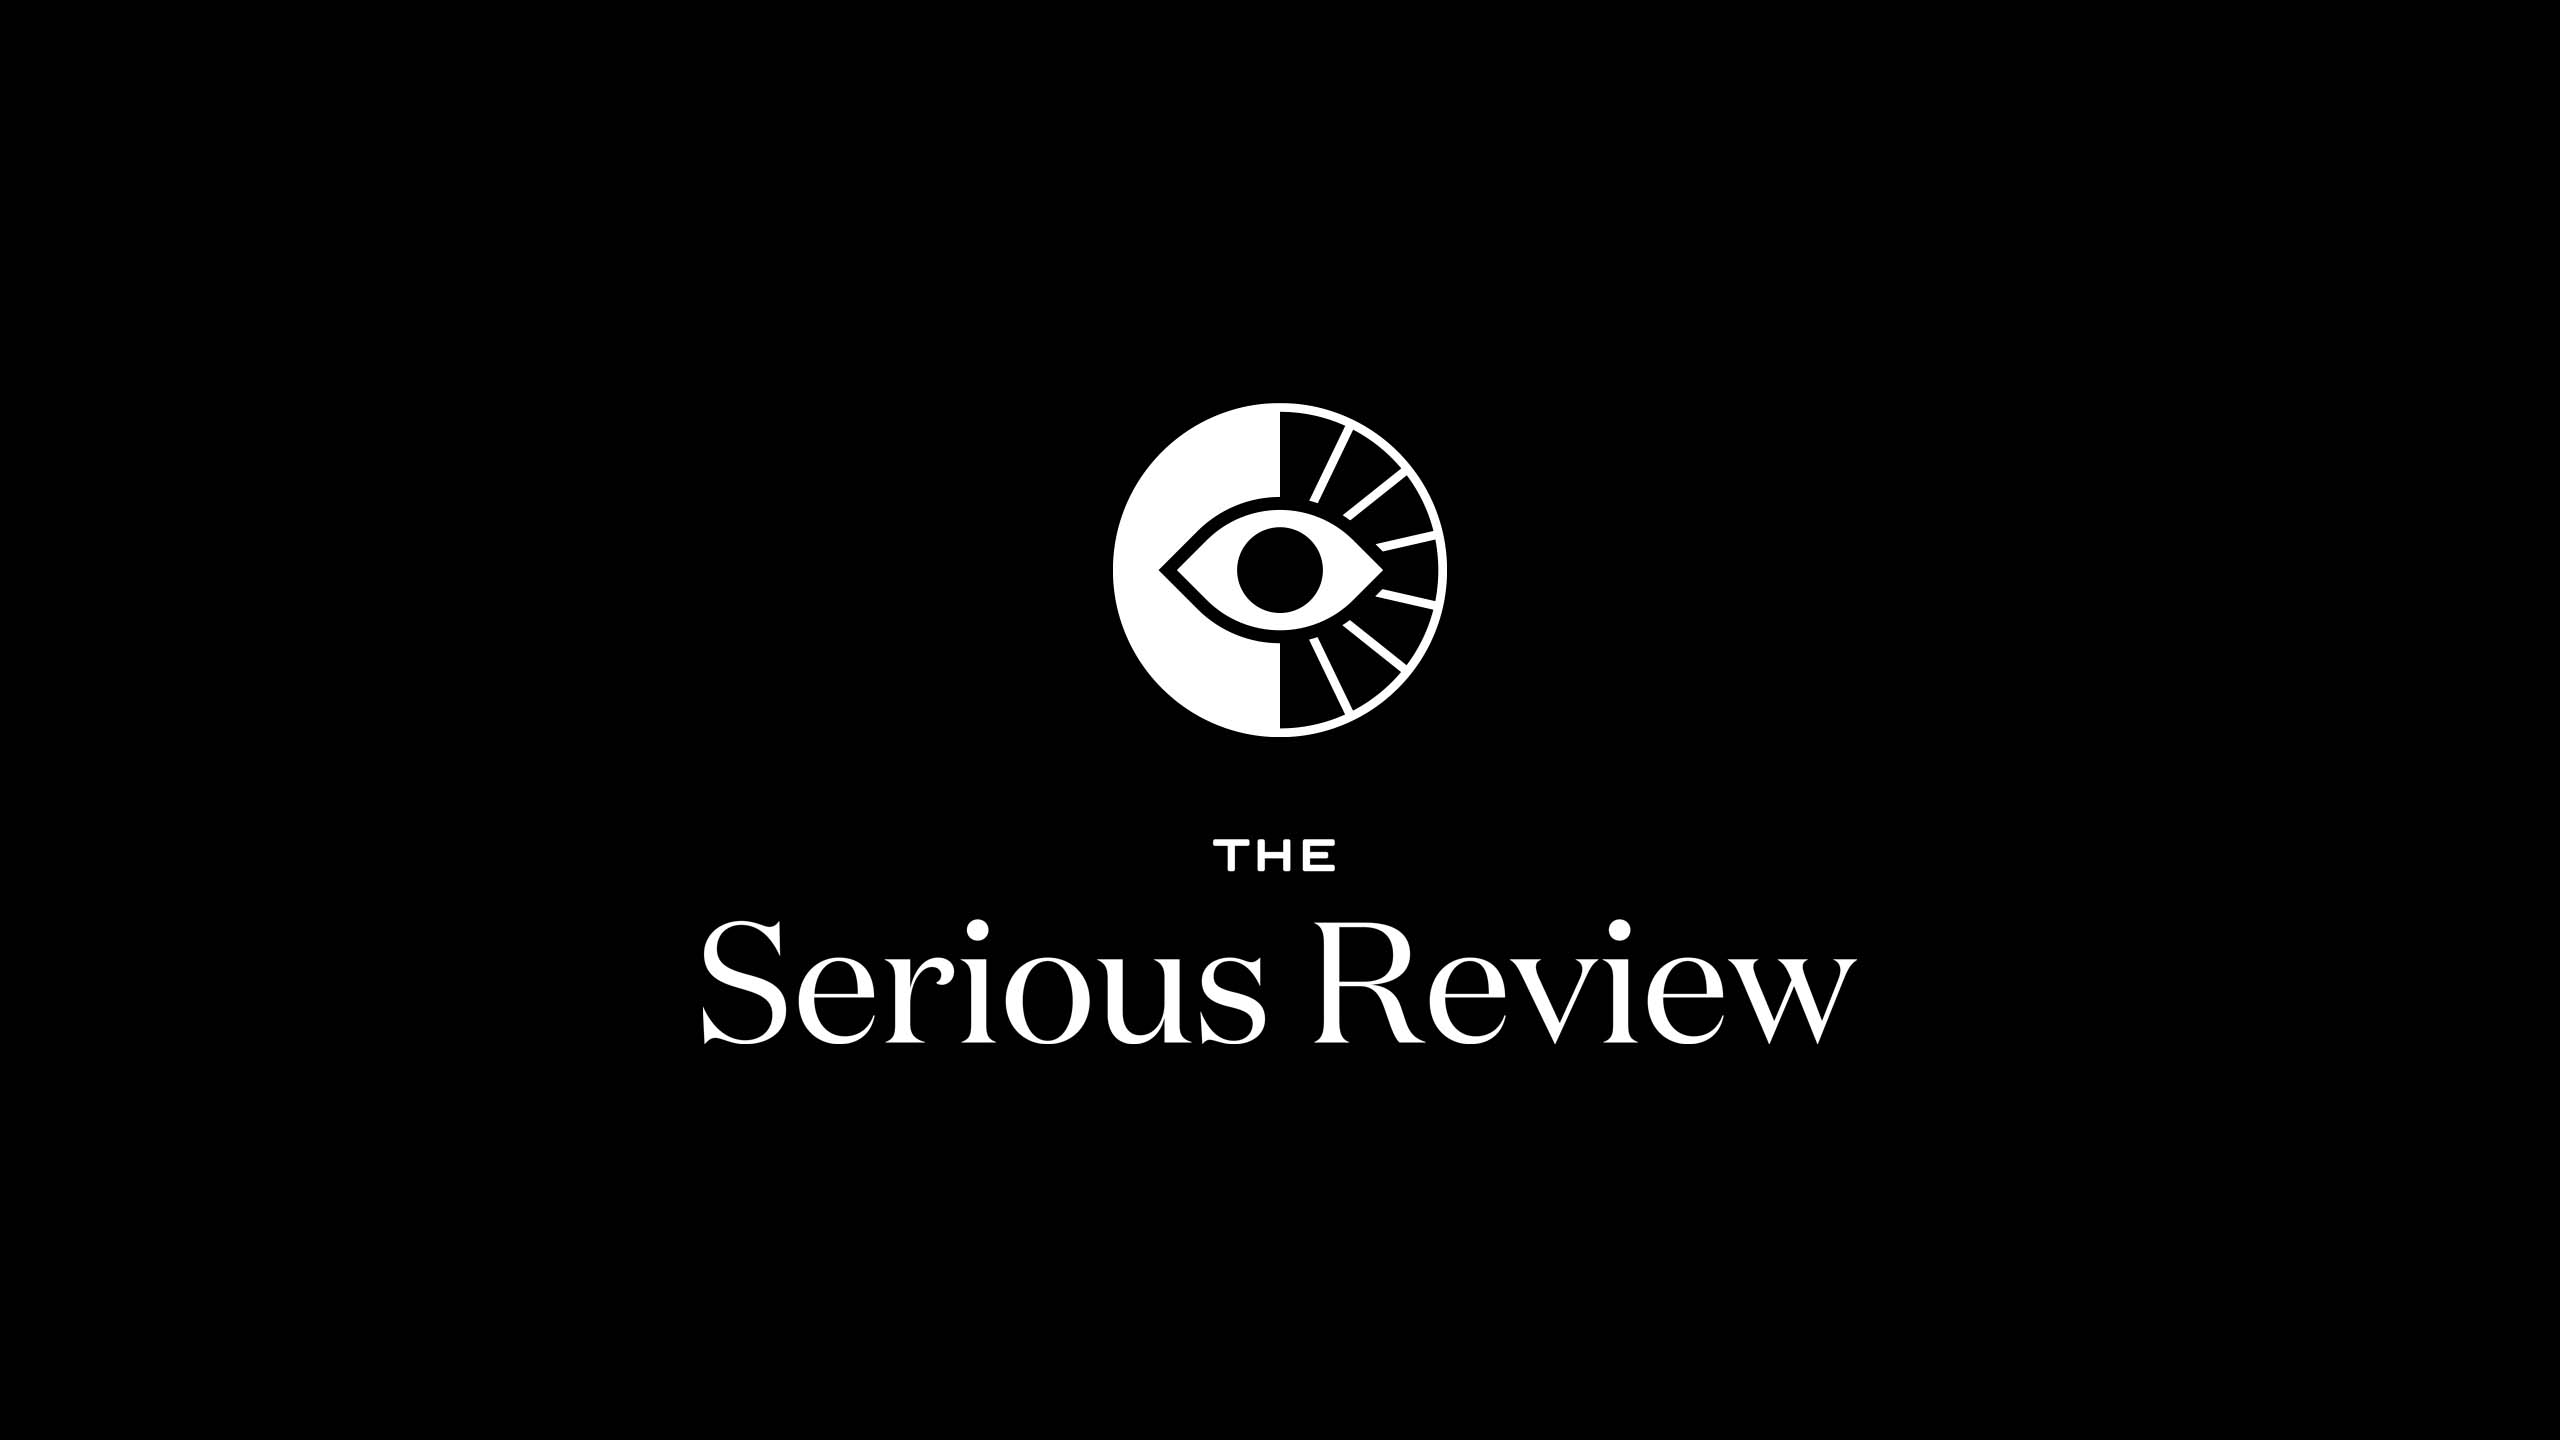 The logo for branding and design magazine The Serious Review